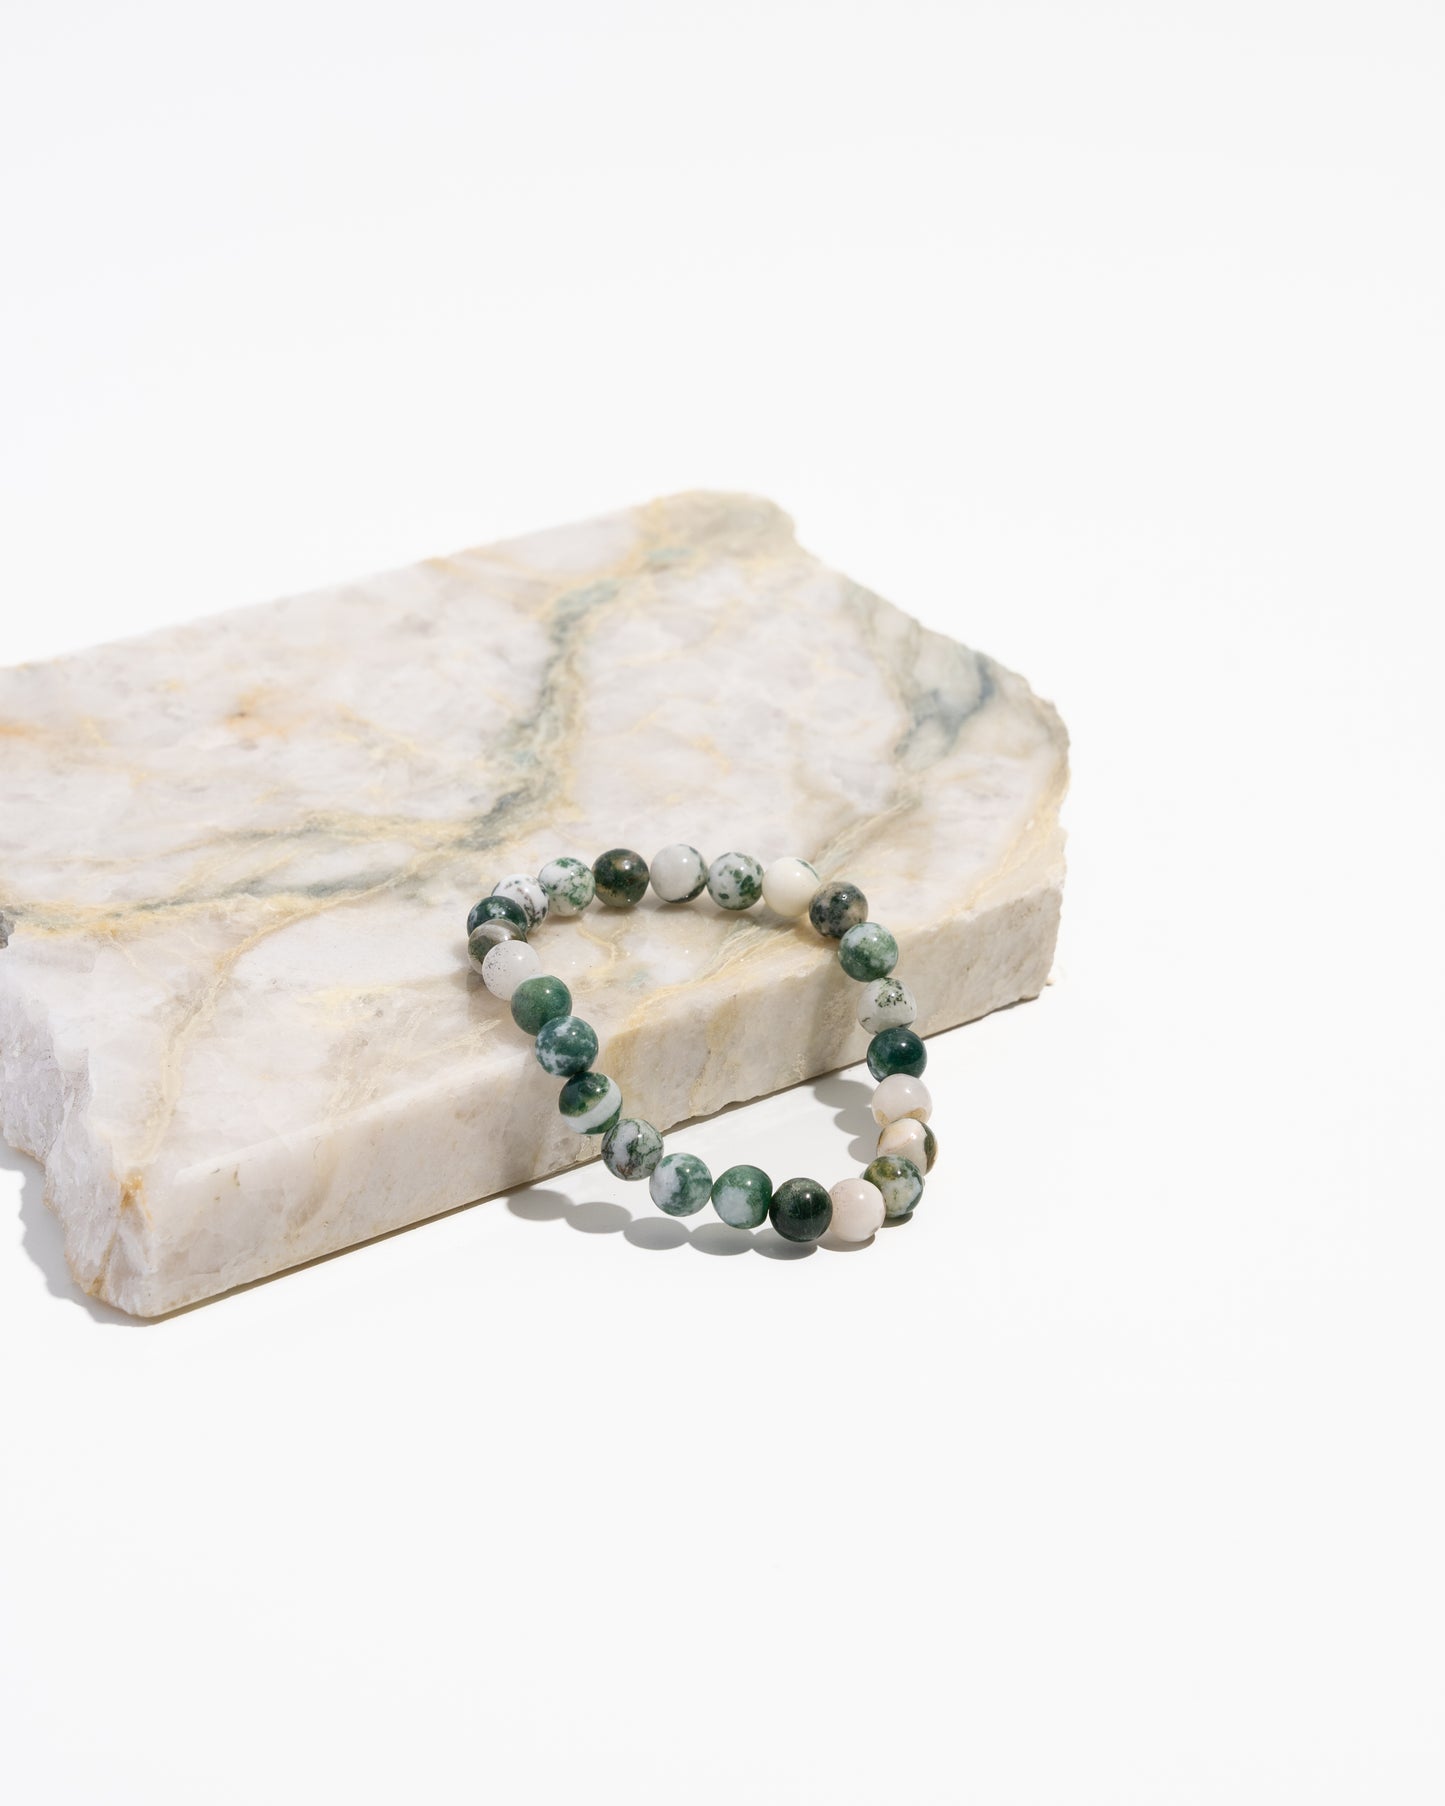 Tree agate Mala bracelet from Think Unique